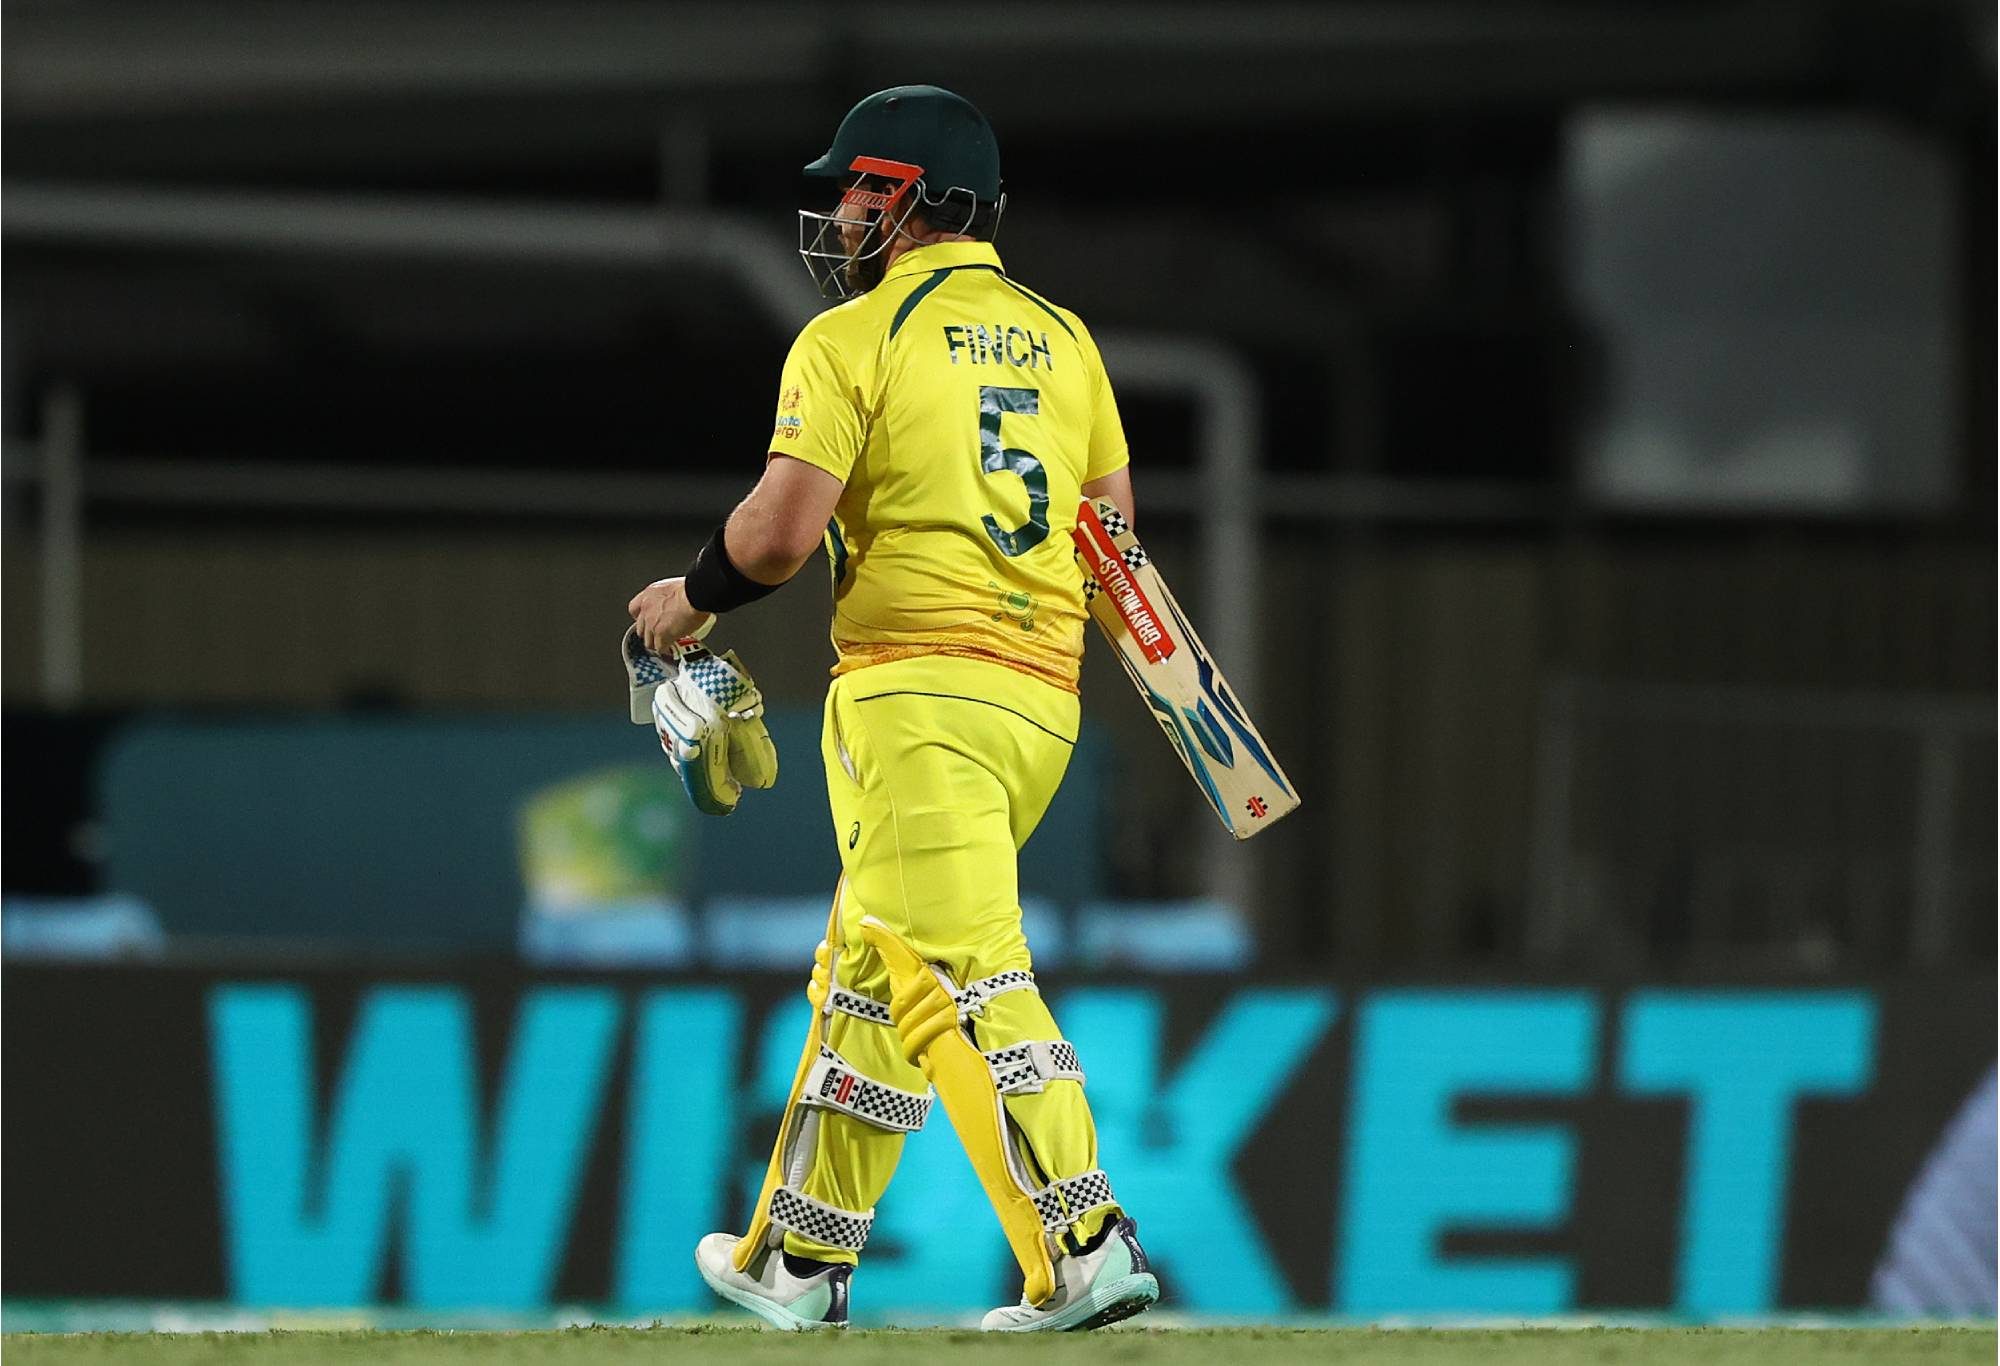 CAIRNS, AUSTRALIA - SEPTEMBER 06: Aaron Finch of Australia walks off after he was dismissed during game one of the One Day International Series between Australia and New Zealand at Cazaly's Stadium on September 06, 2022 in Cairns, Australia. (Photo by Robert Cianflone/Getty Images)